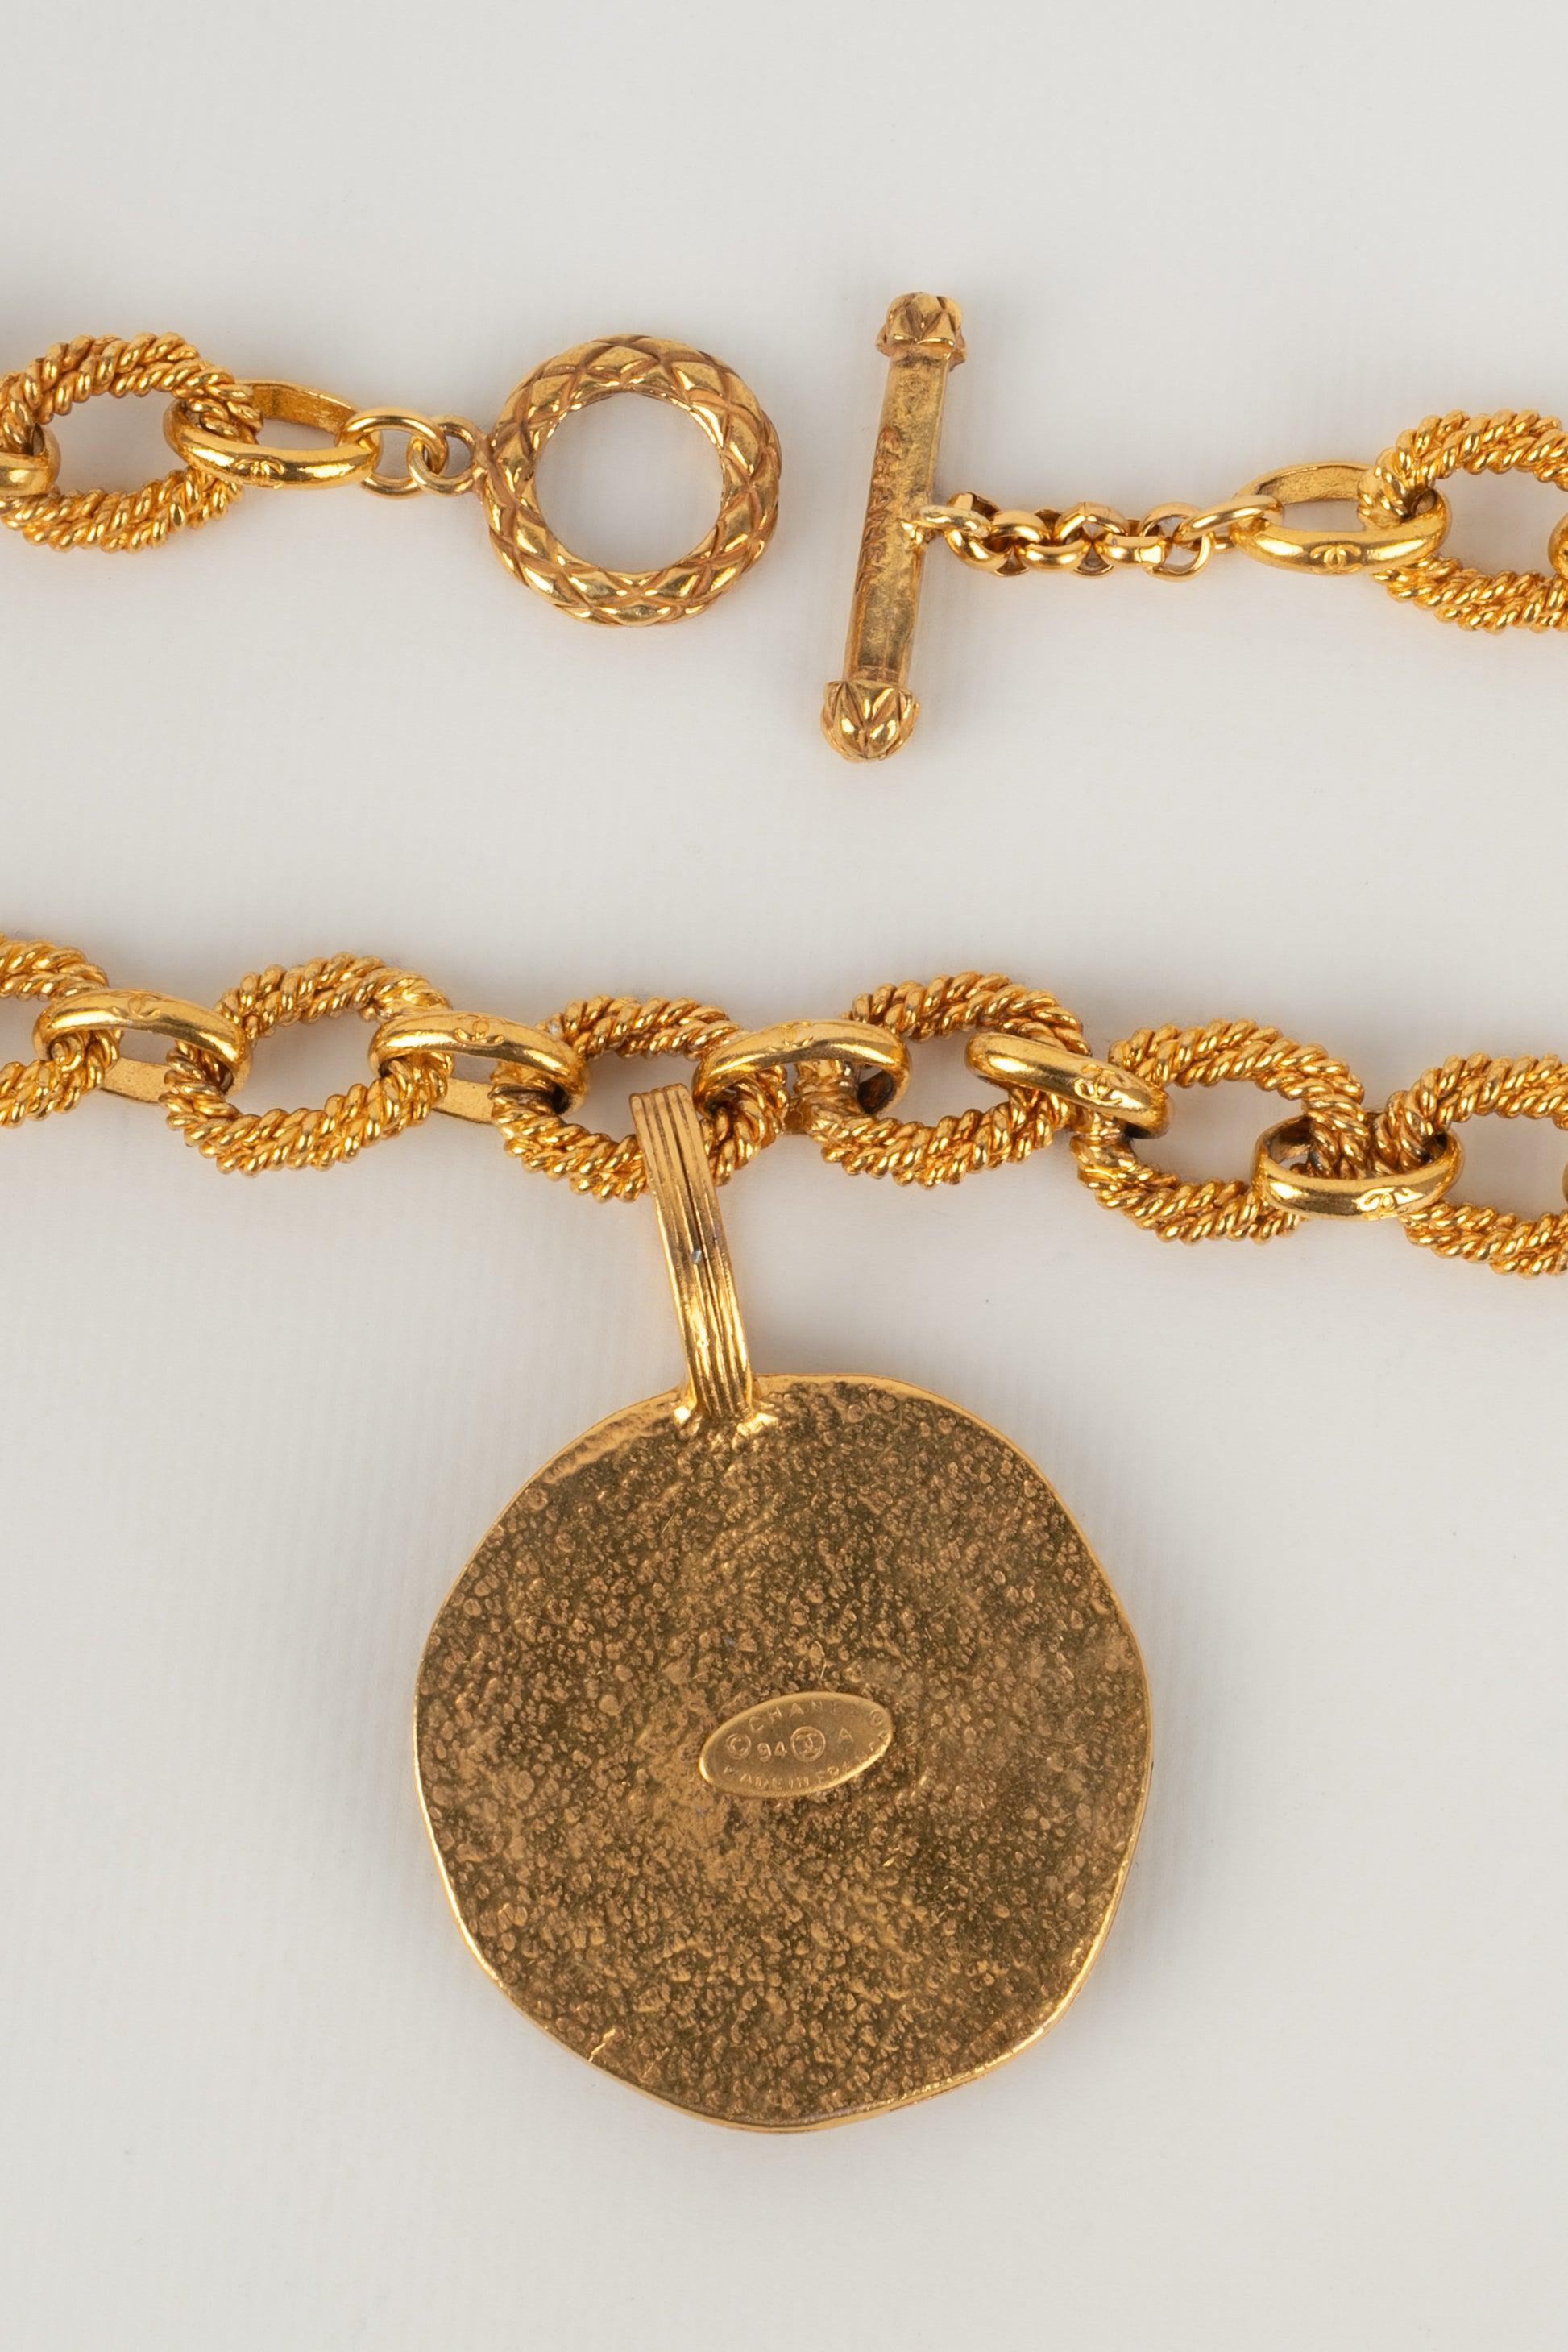 Chanel Golden Metal Necklace with a Sun Pendant, 1993 For Sale 1